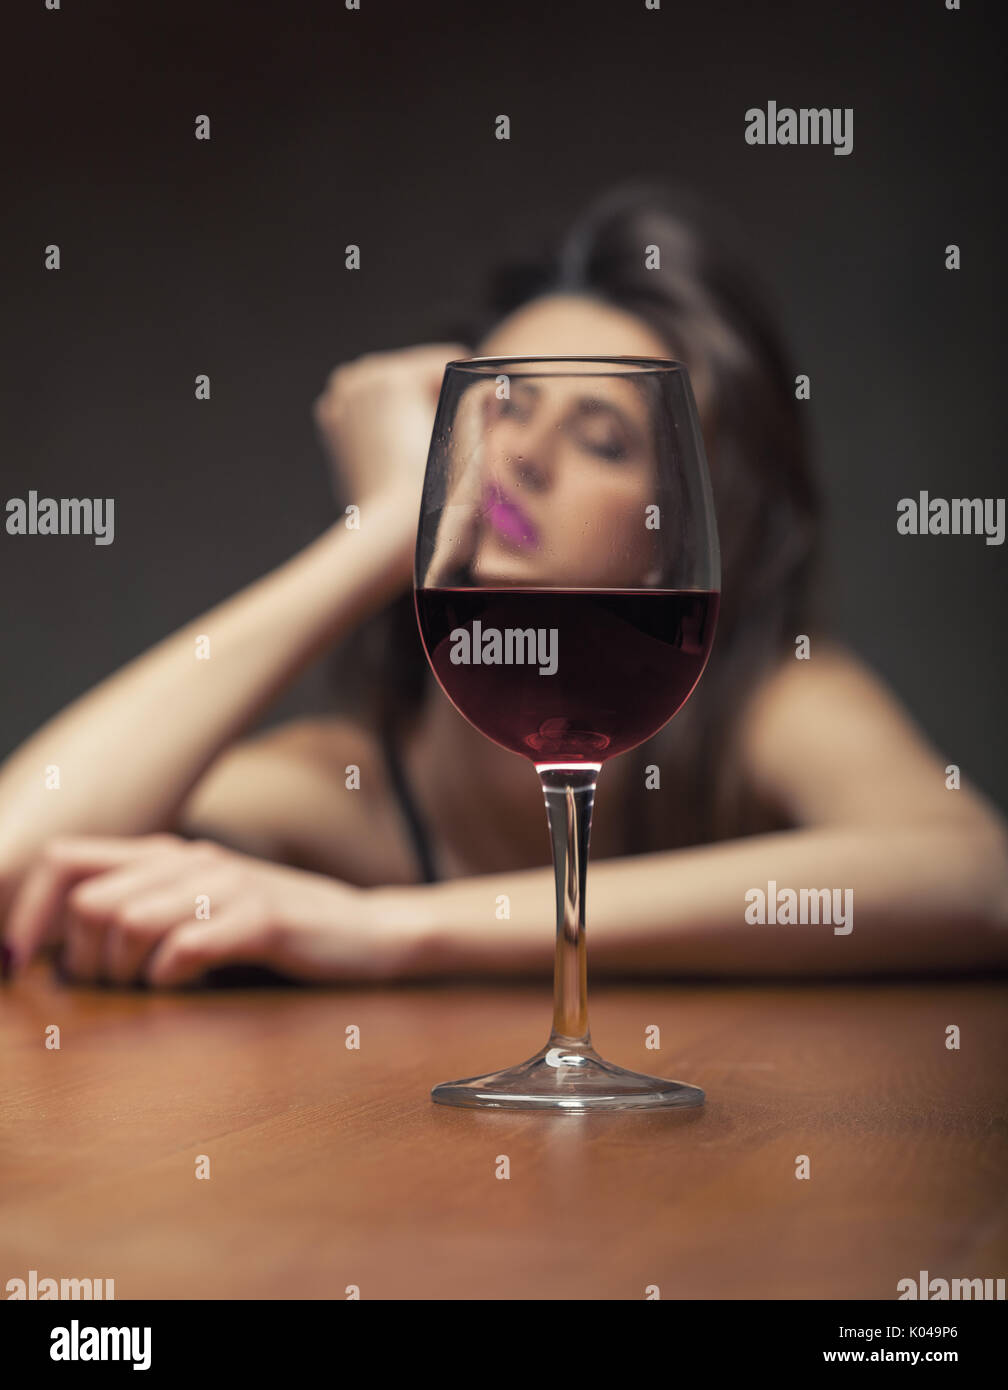 Woman in depression, drinking alcohol on dark background. Focus on the glass Stock Photo